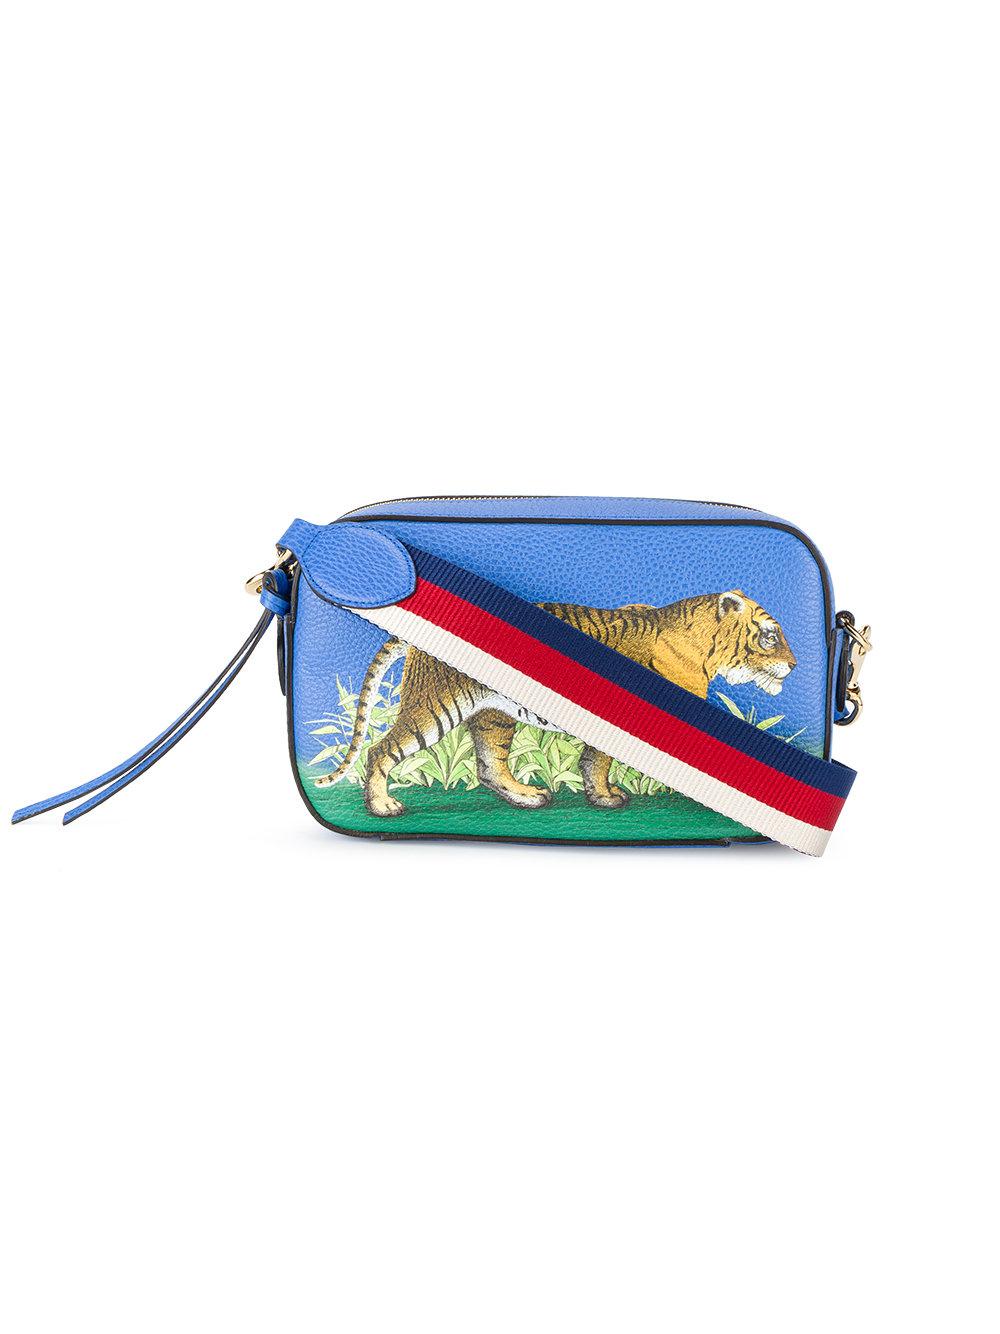 Gucci Leather Bengal Tiger Print Cross-body Bag in Blue - Lyst